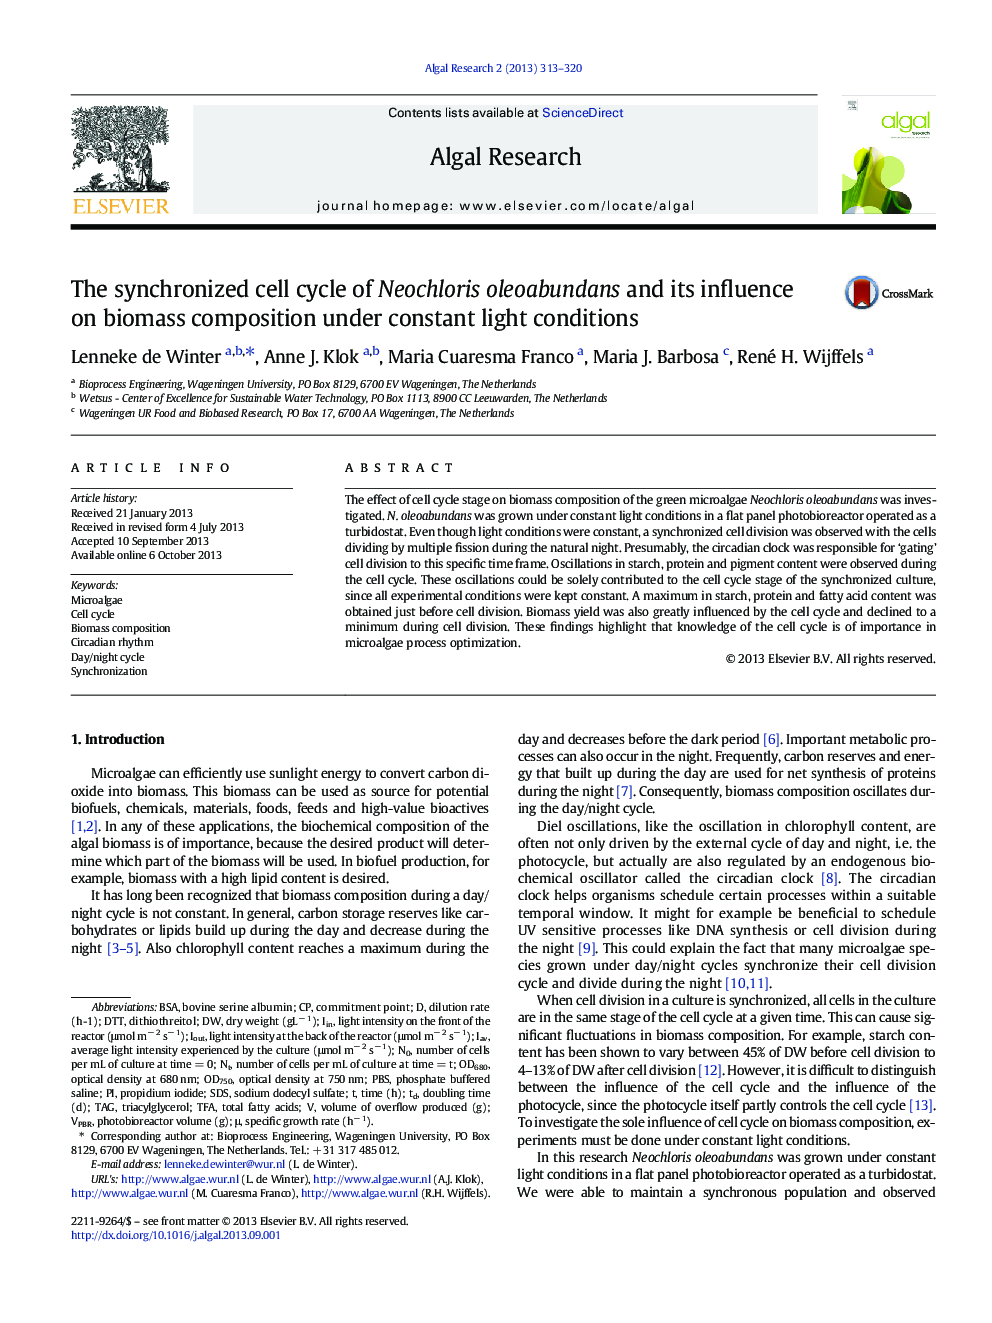 The synchronized cell cycle of Neochloris oleoabundans and its influence on biomass composition under constant light conditions